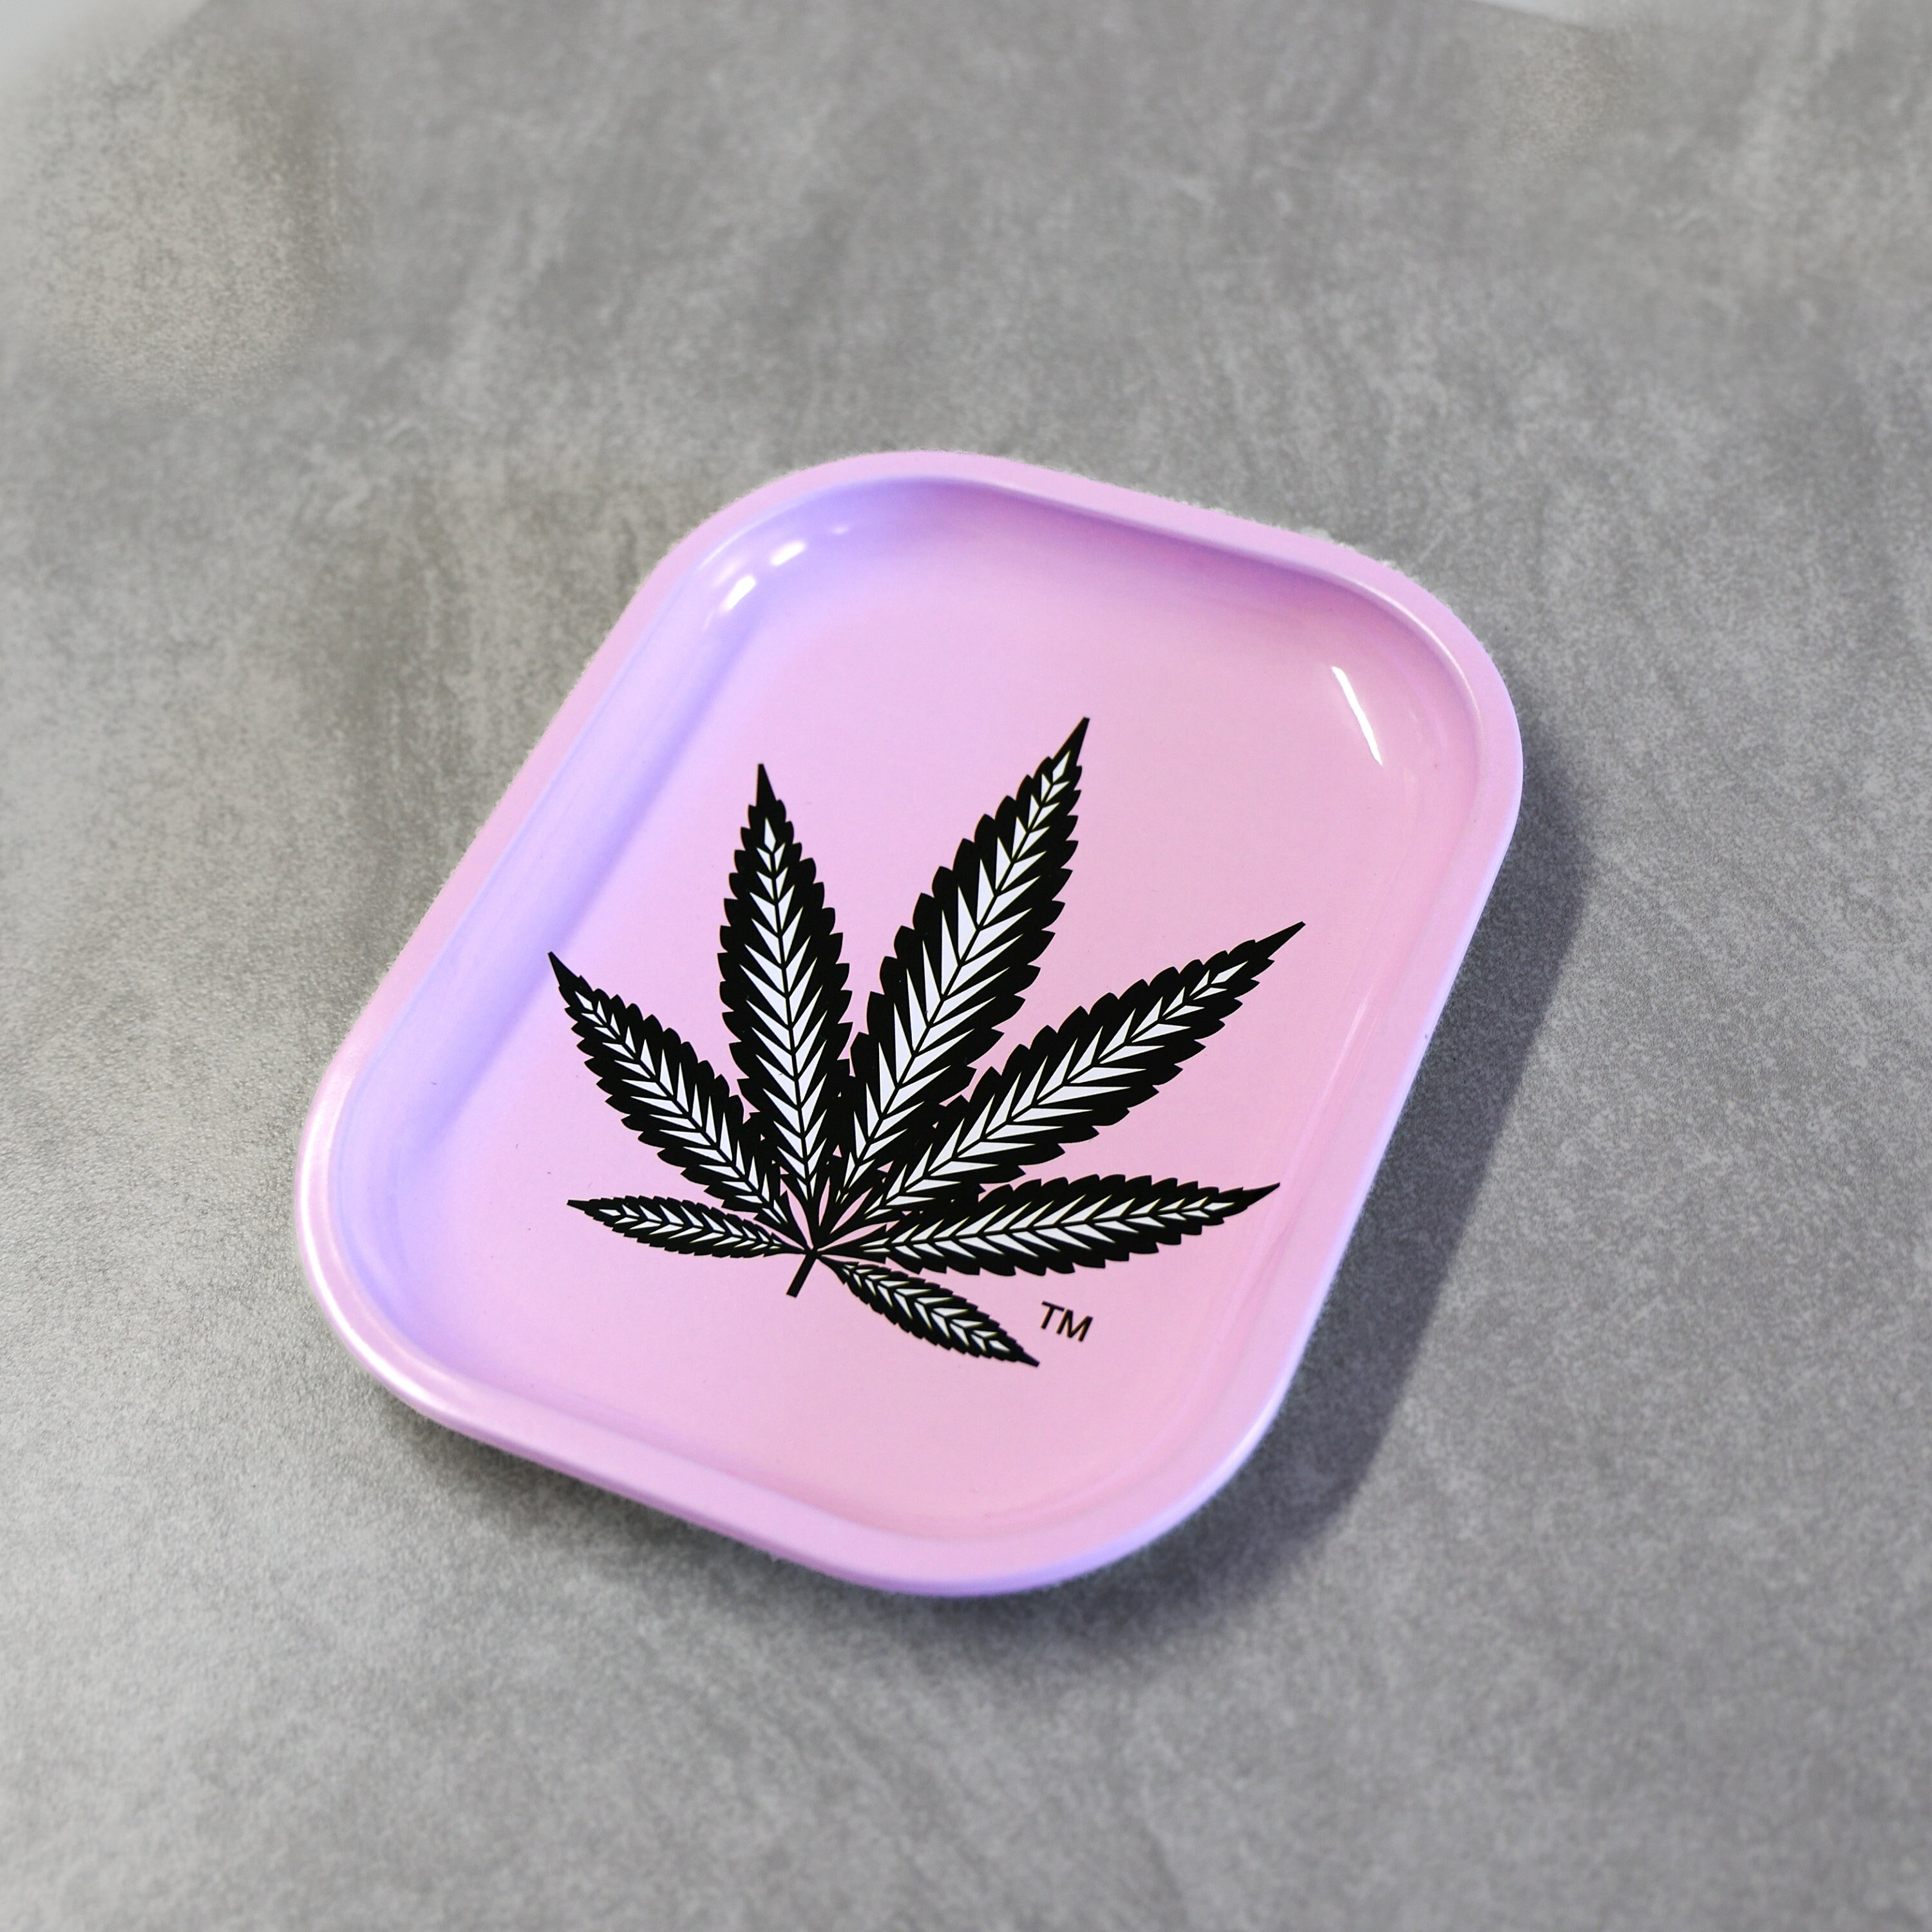 Pink Rolling Tray Girly - Cute Rolling Trays Premium Metal Small Tray with  Design - Unique Gifts for Women Girls Mom, Travel Accessories, 7'' X 5.5